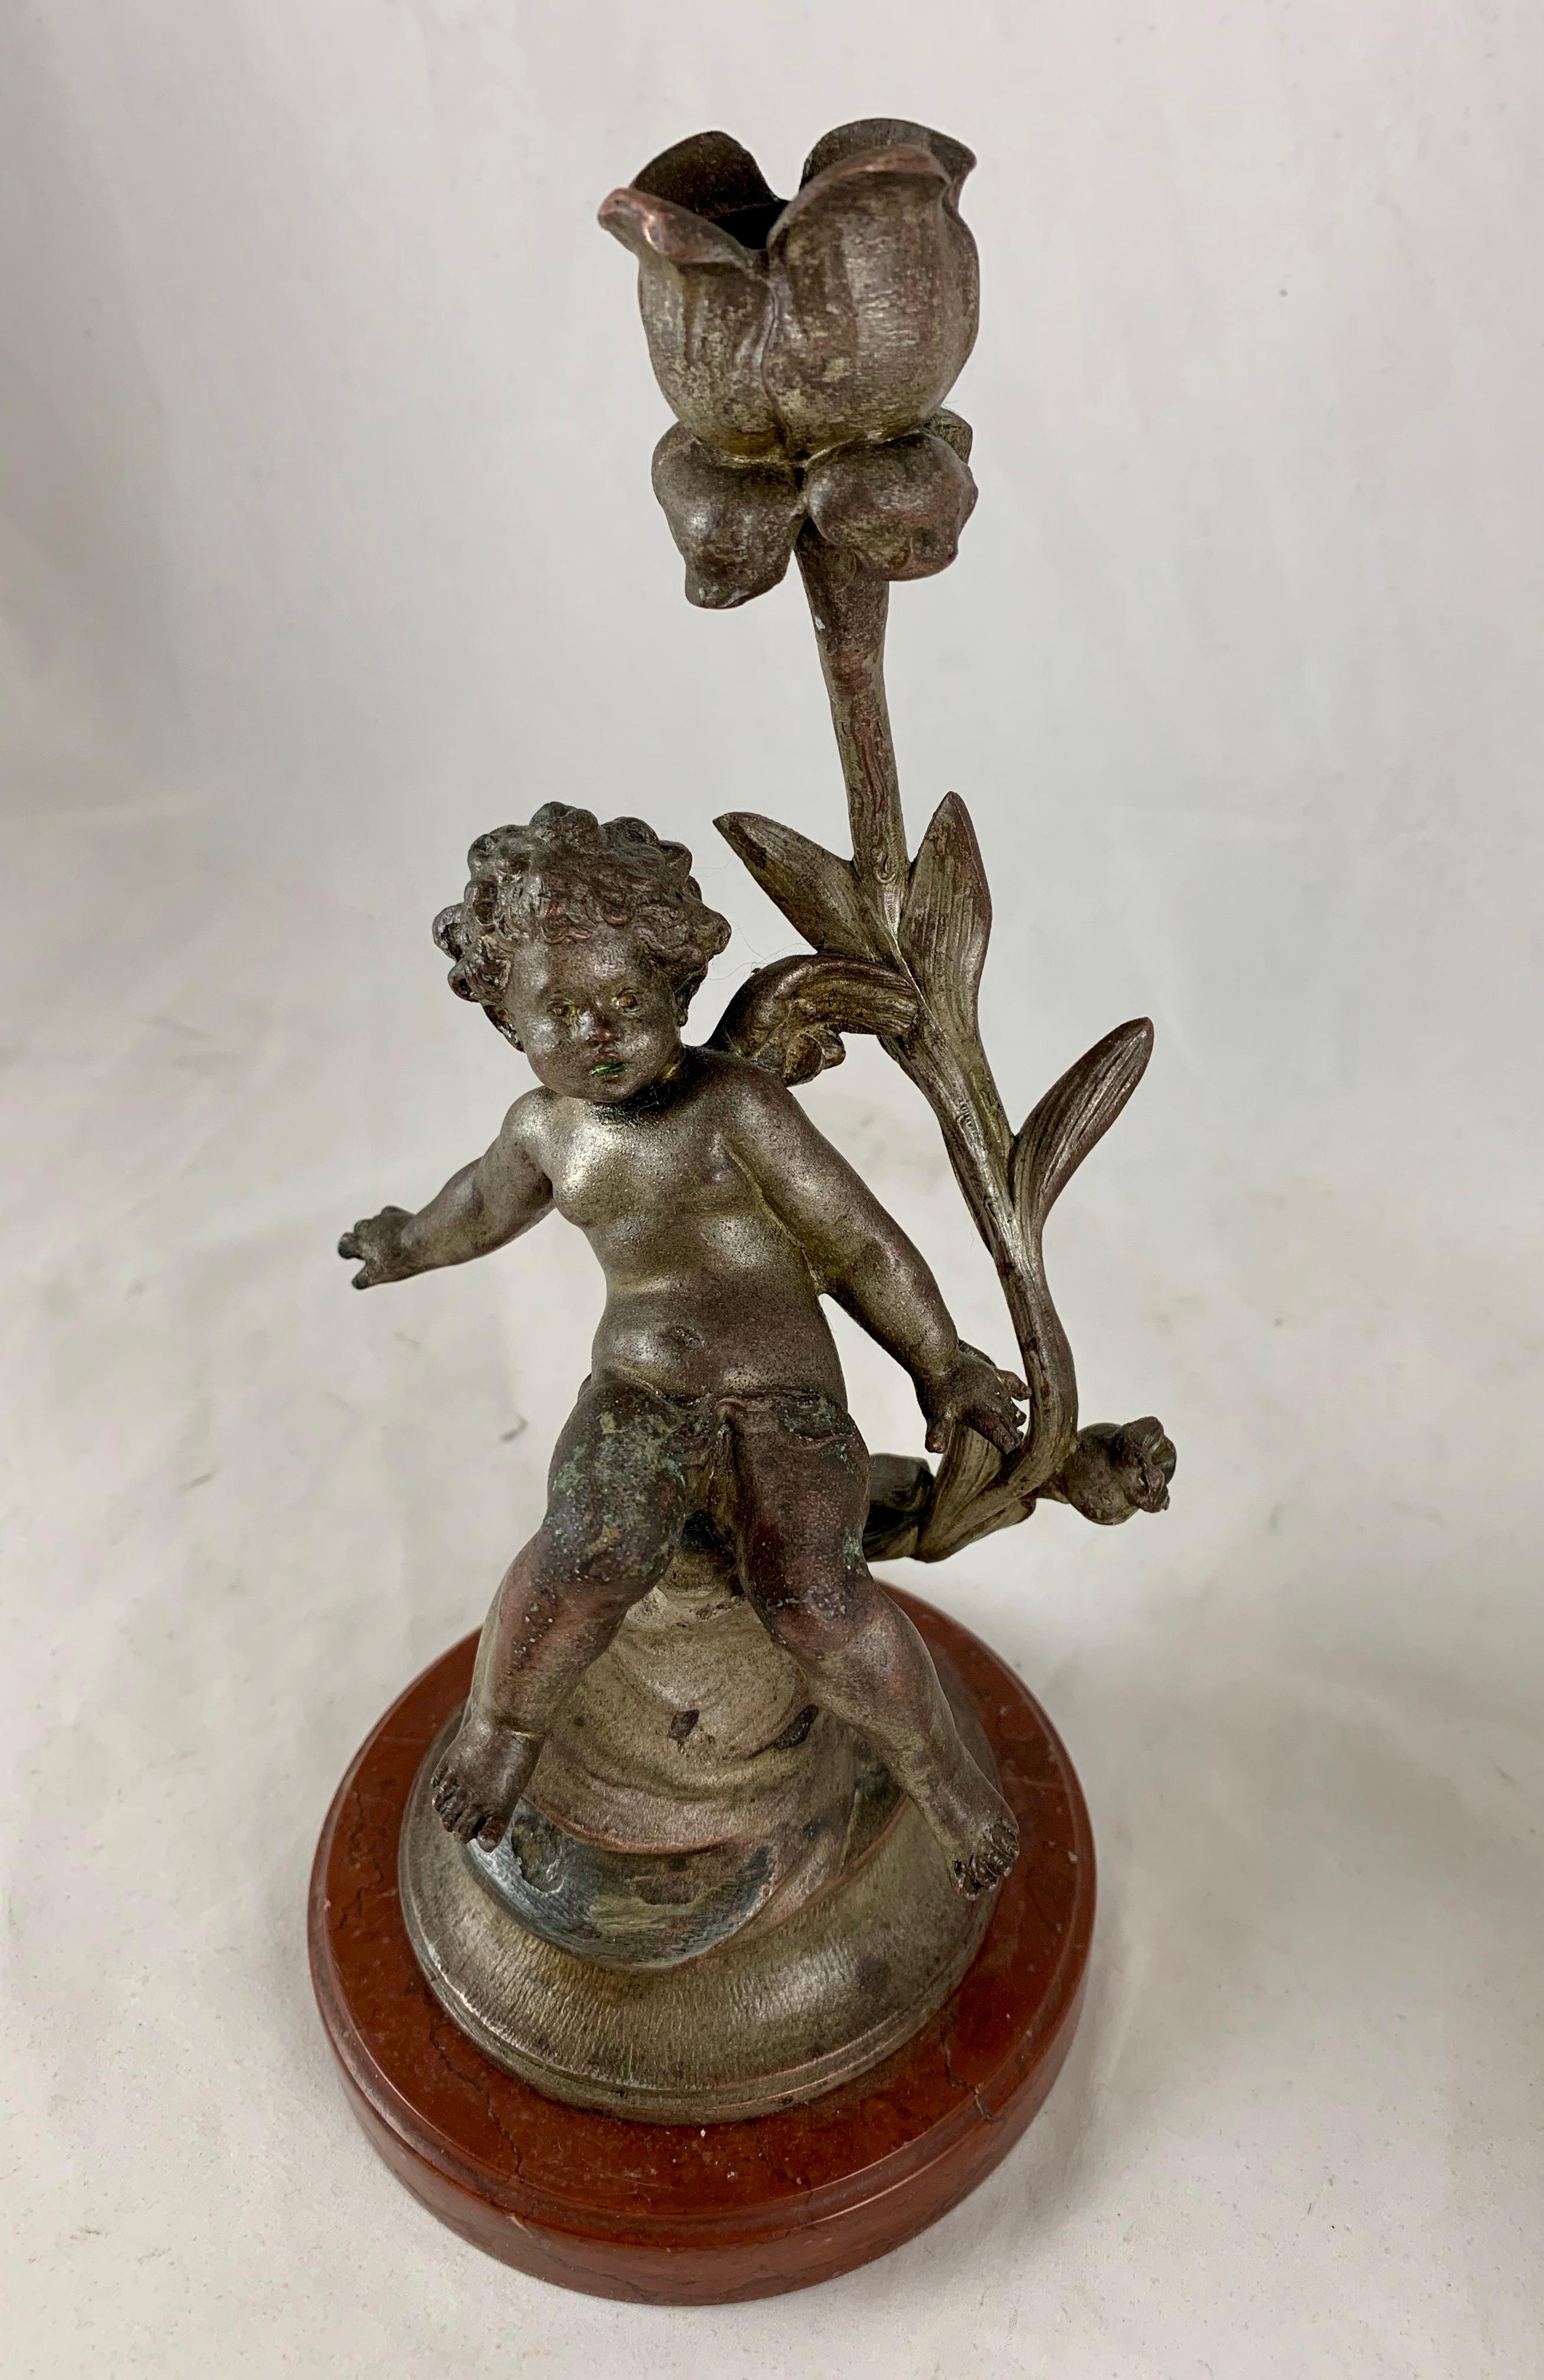 French Putti Cherub Candlesticks Signed Sylvain Kinsburger Spelter & Marble S/2 2